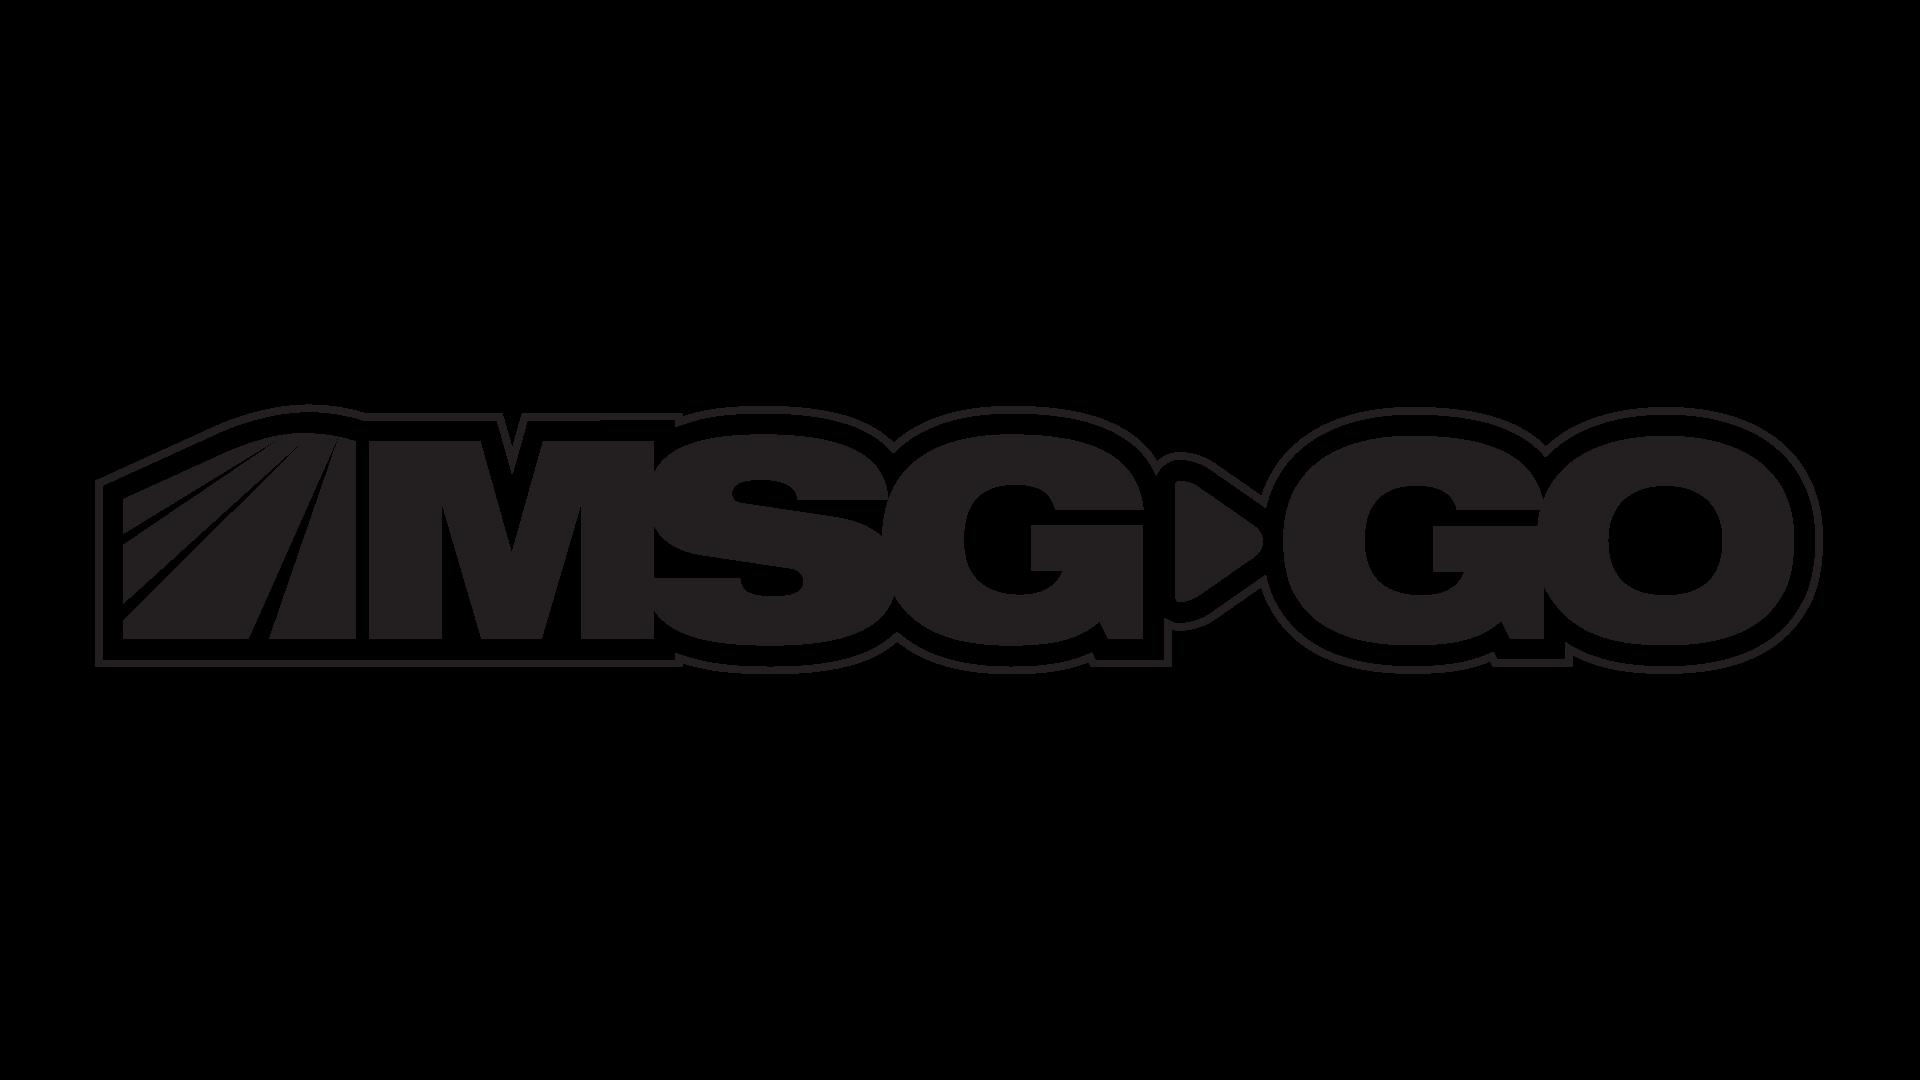 MSG Networks releases 2022-23 New York Rangers broadcast schedule